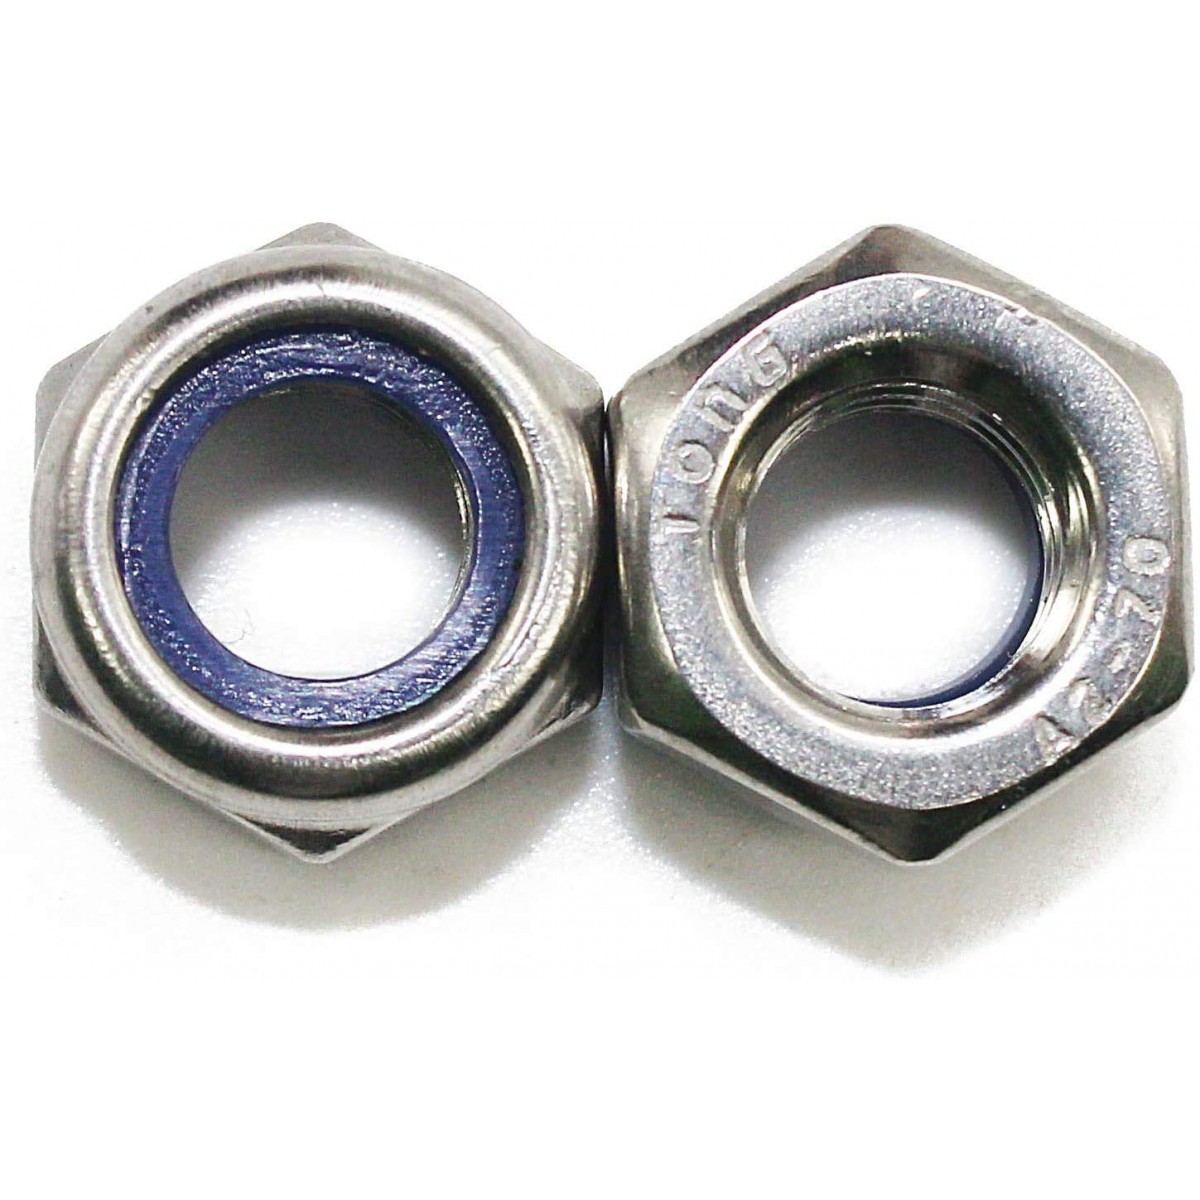 Qty 10 Nylon Insert Hex Lock Nut DIN 985 M4-0.7 / 4mm A2 Stainless Steel 